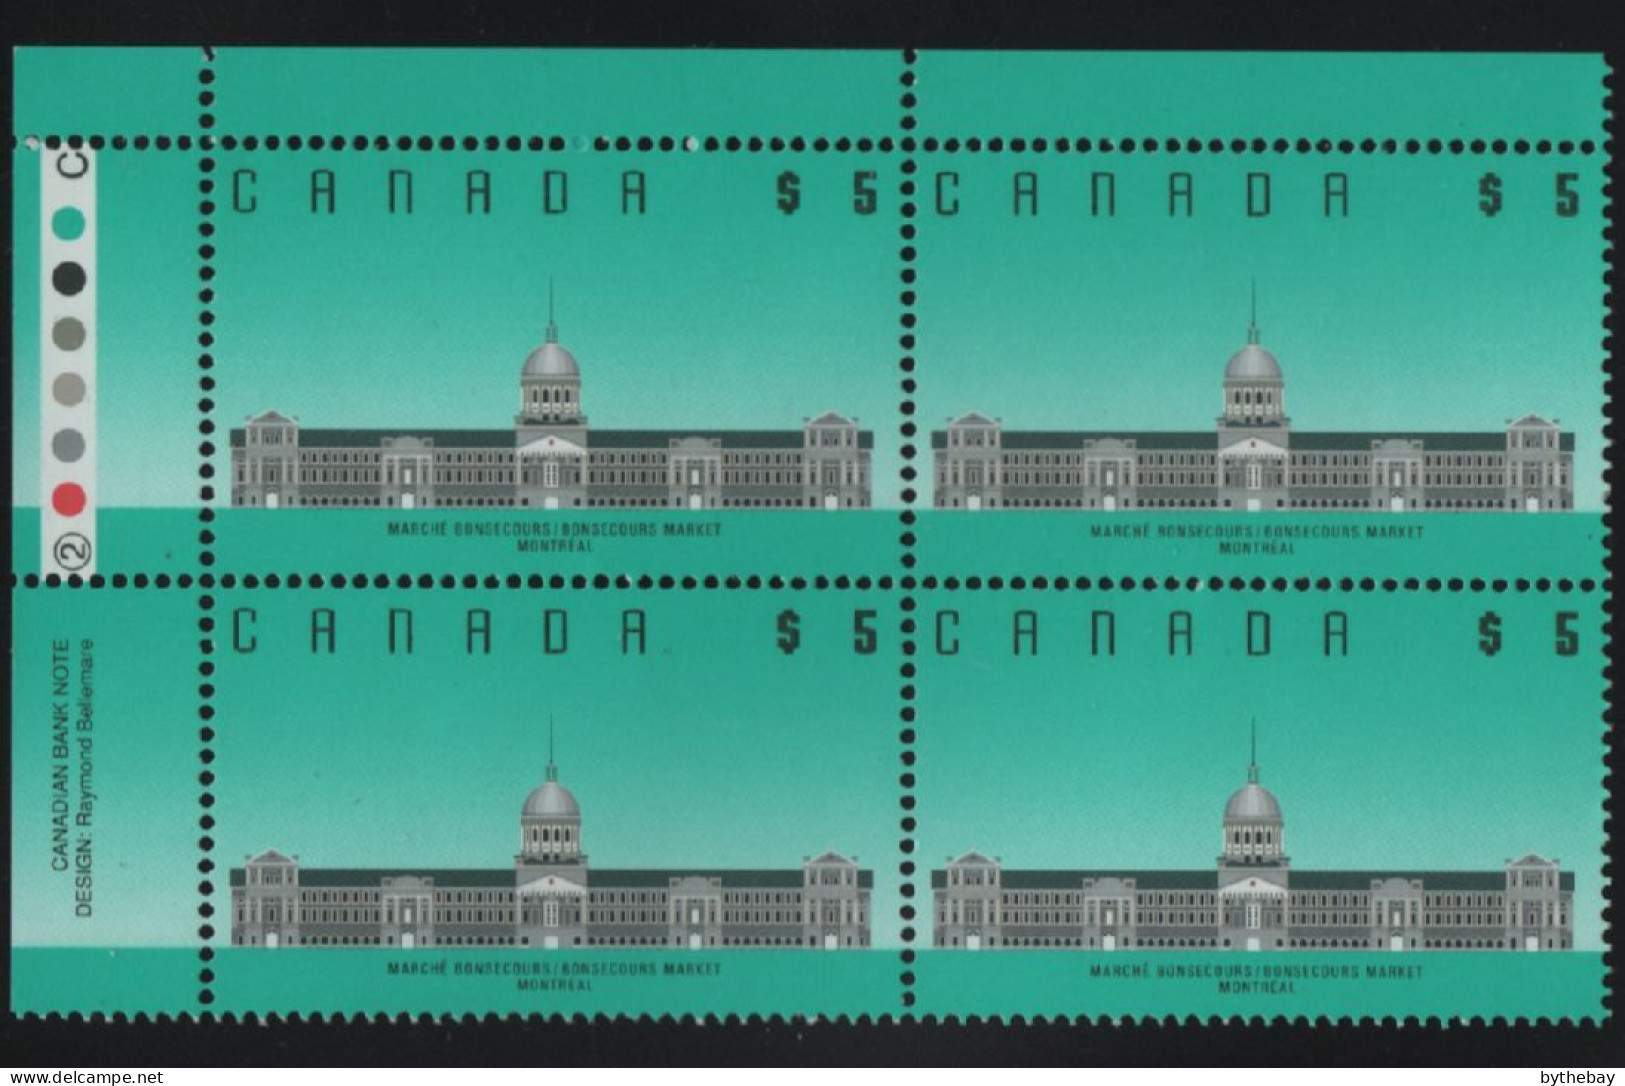 Canada 1988-92 MNH Sc 1183i $5 Bonsecours Market UL Plate Block - Plate Number & Inscriptions